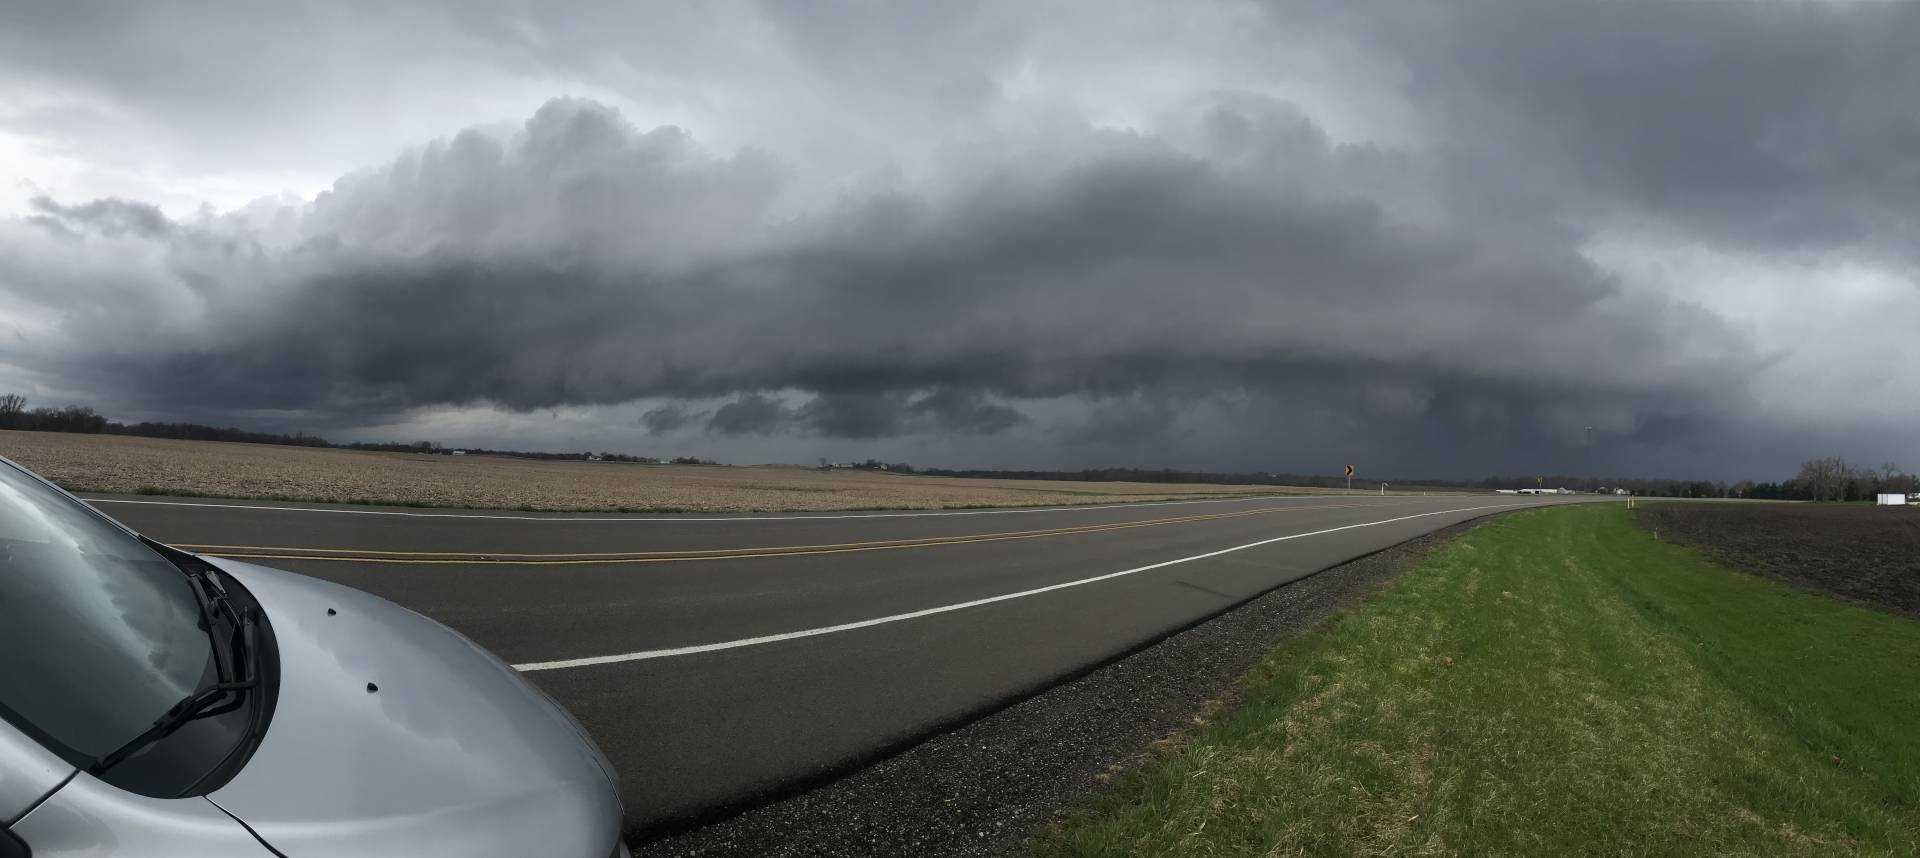 Wide of this thing! #ILwx